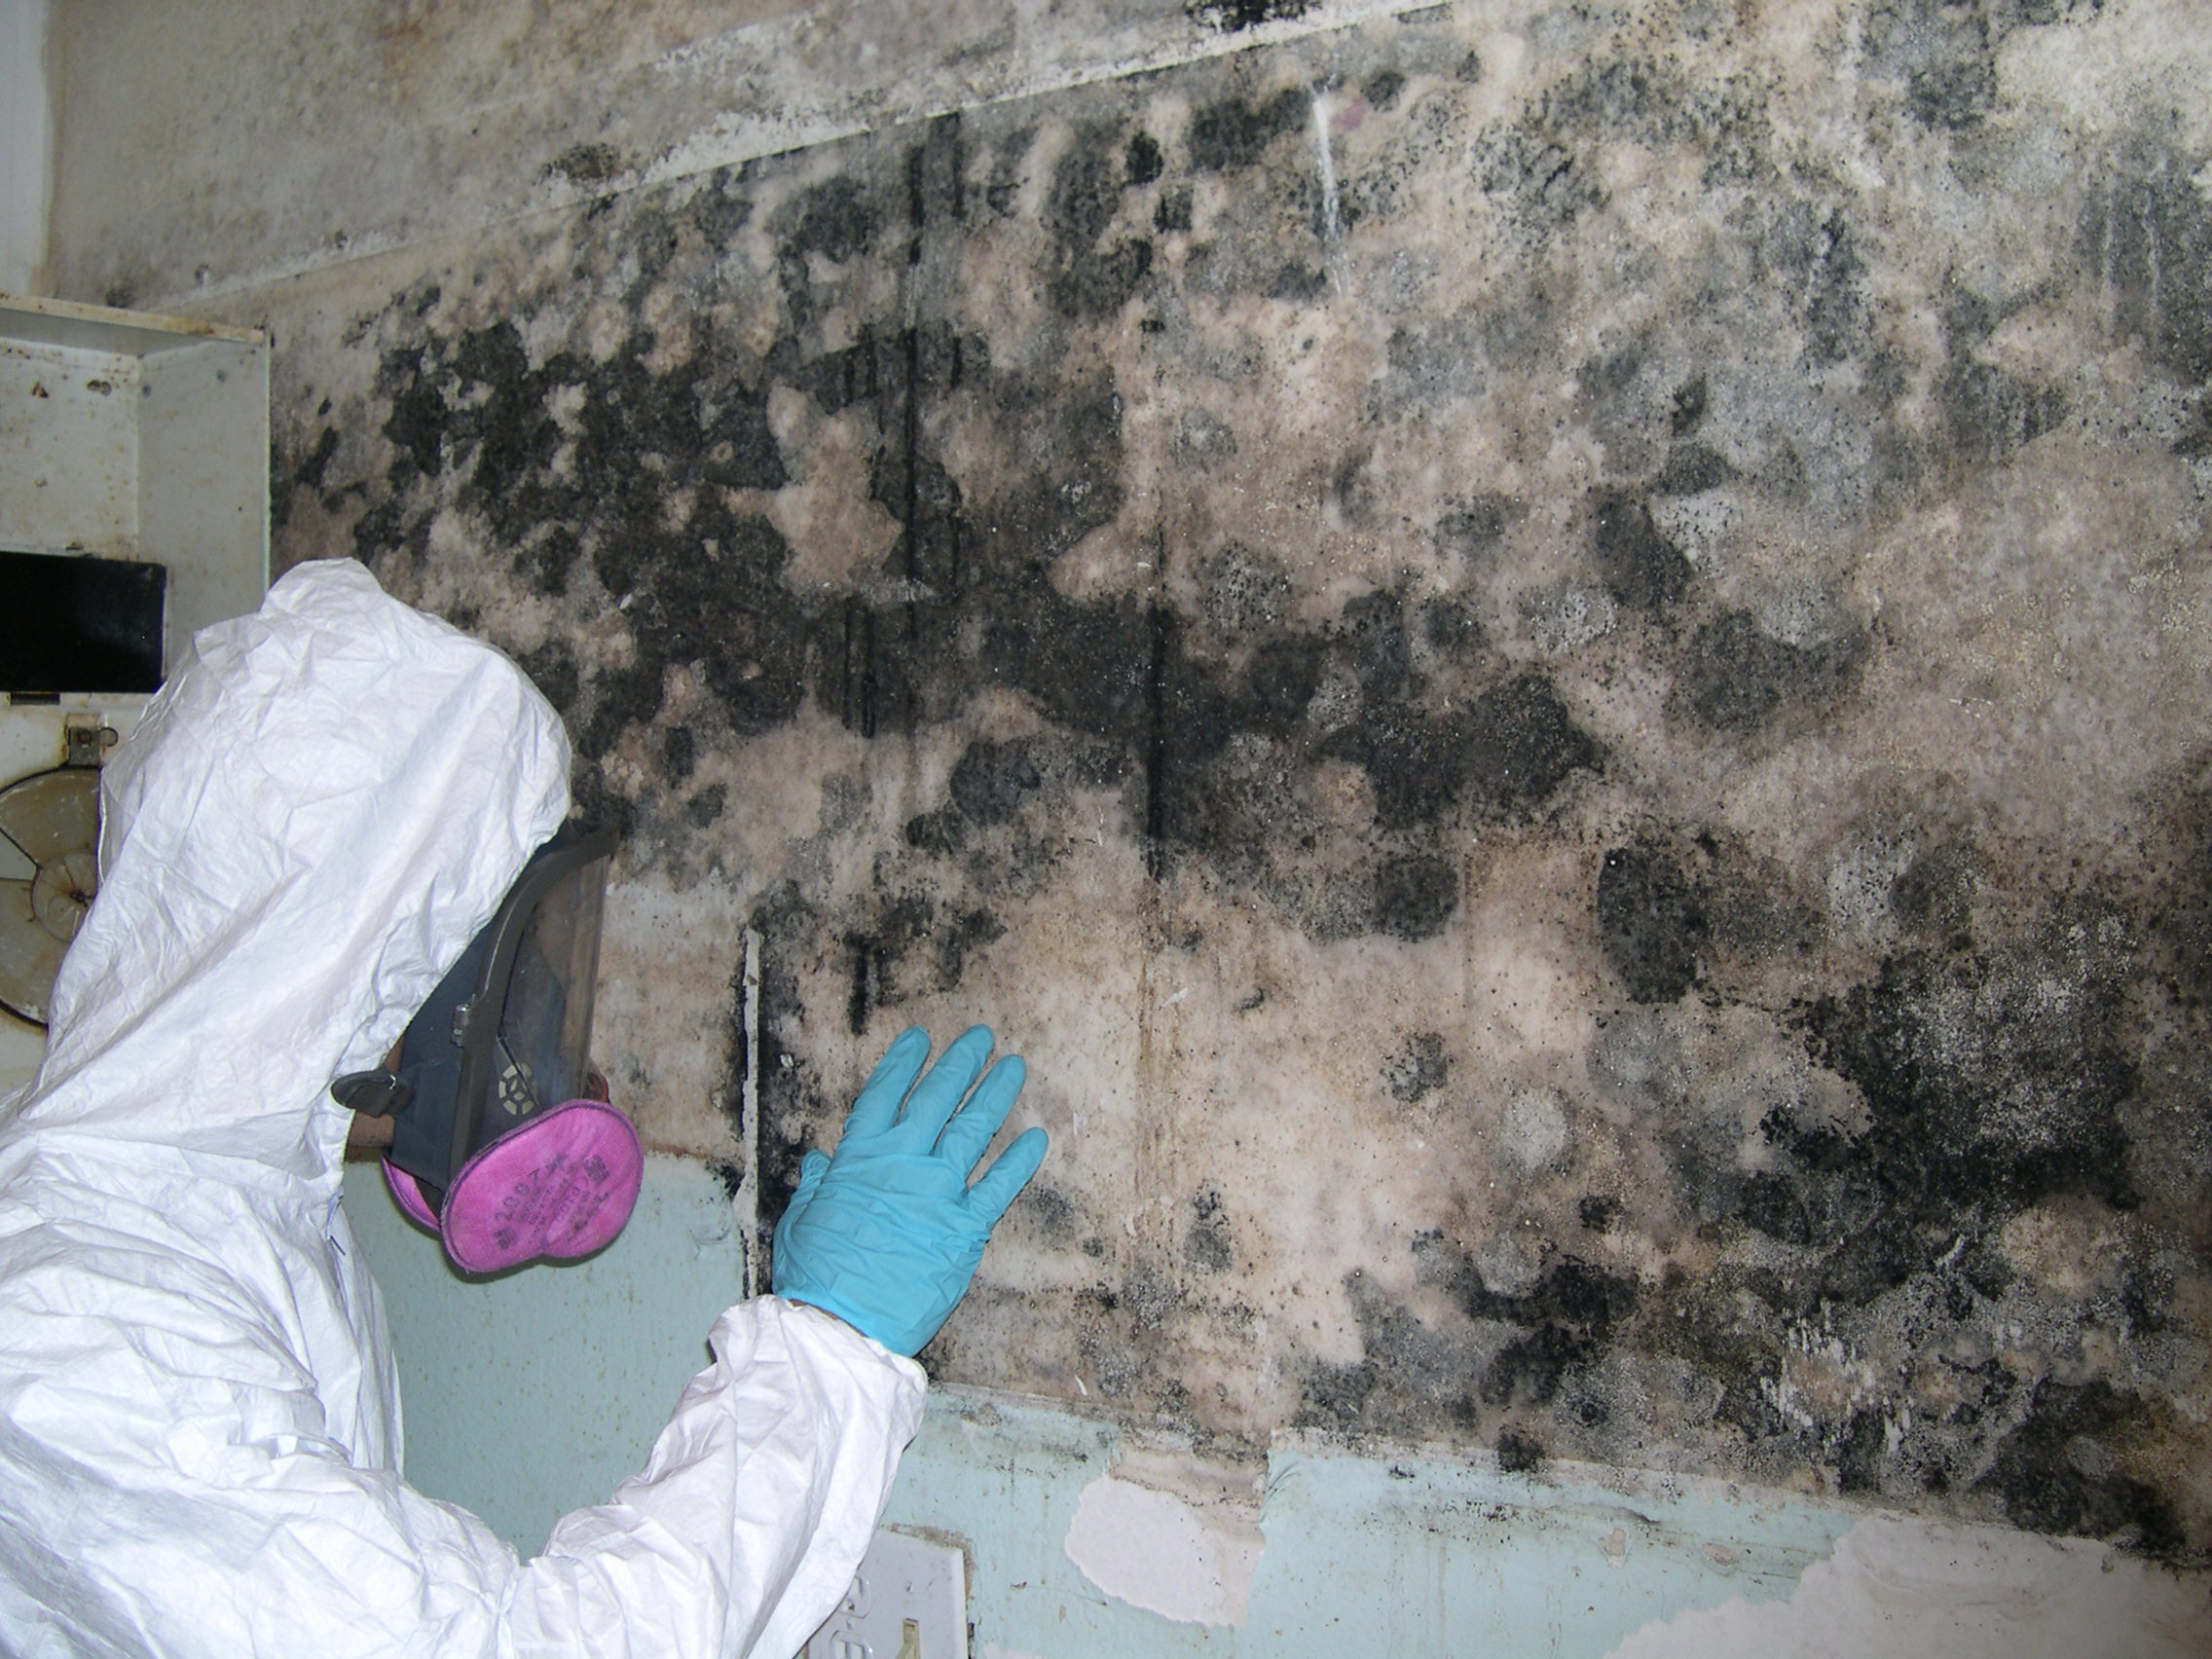 Mold Removal Companies - How To Find The Best